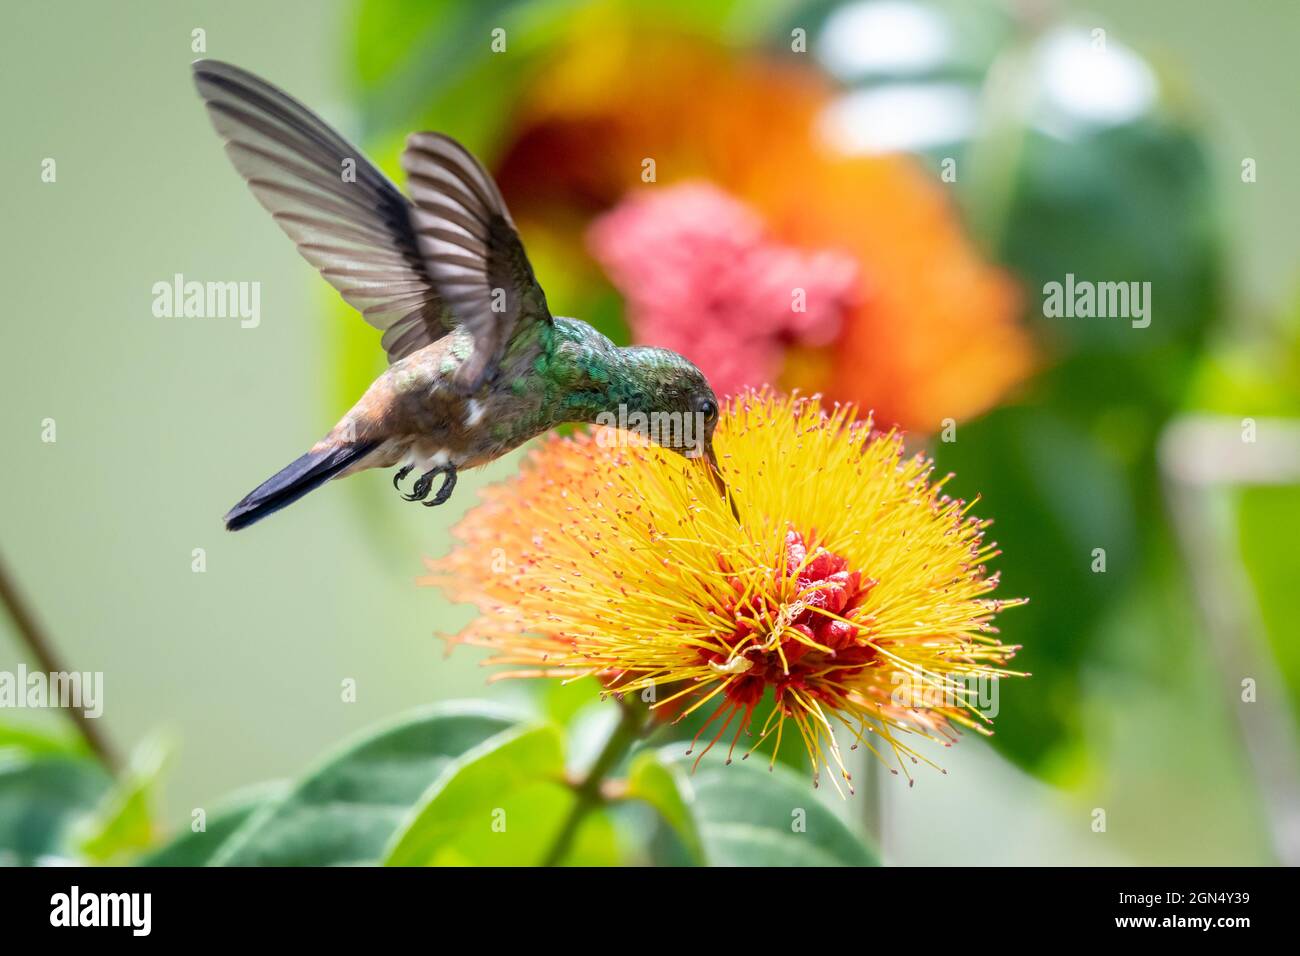 A juvenile Copper-rumped hummingbird (Amazilia tobaci) feeding on the tropical Monkey Brush flower (combretum) with a colorfully blurred background. Stock Photo